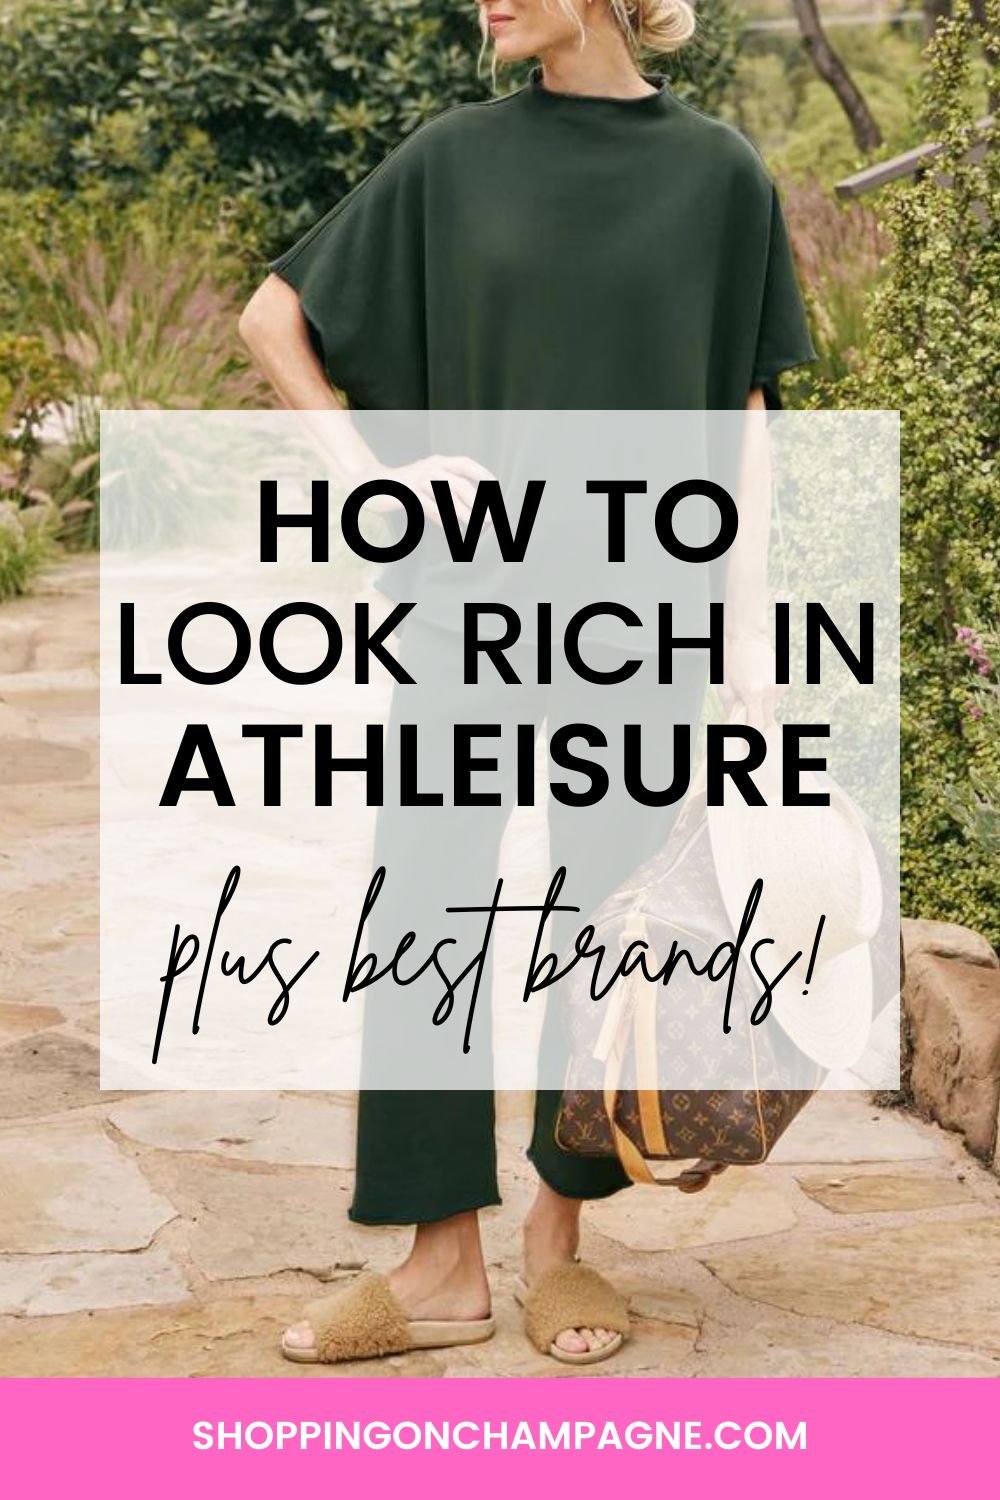 How To Style Athleisure For Everyday (HINT: It's All About The Bag